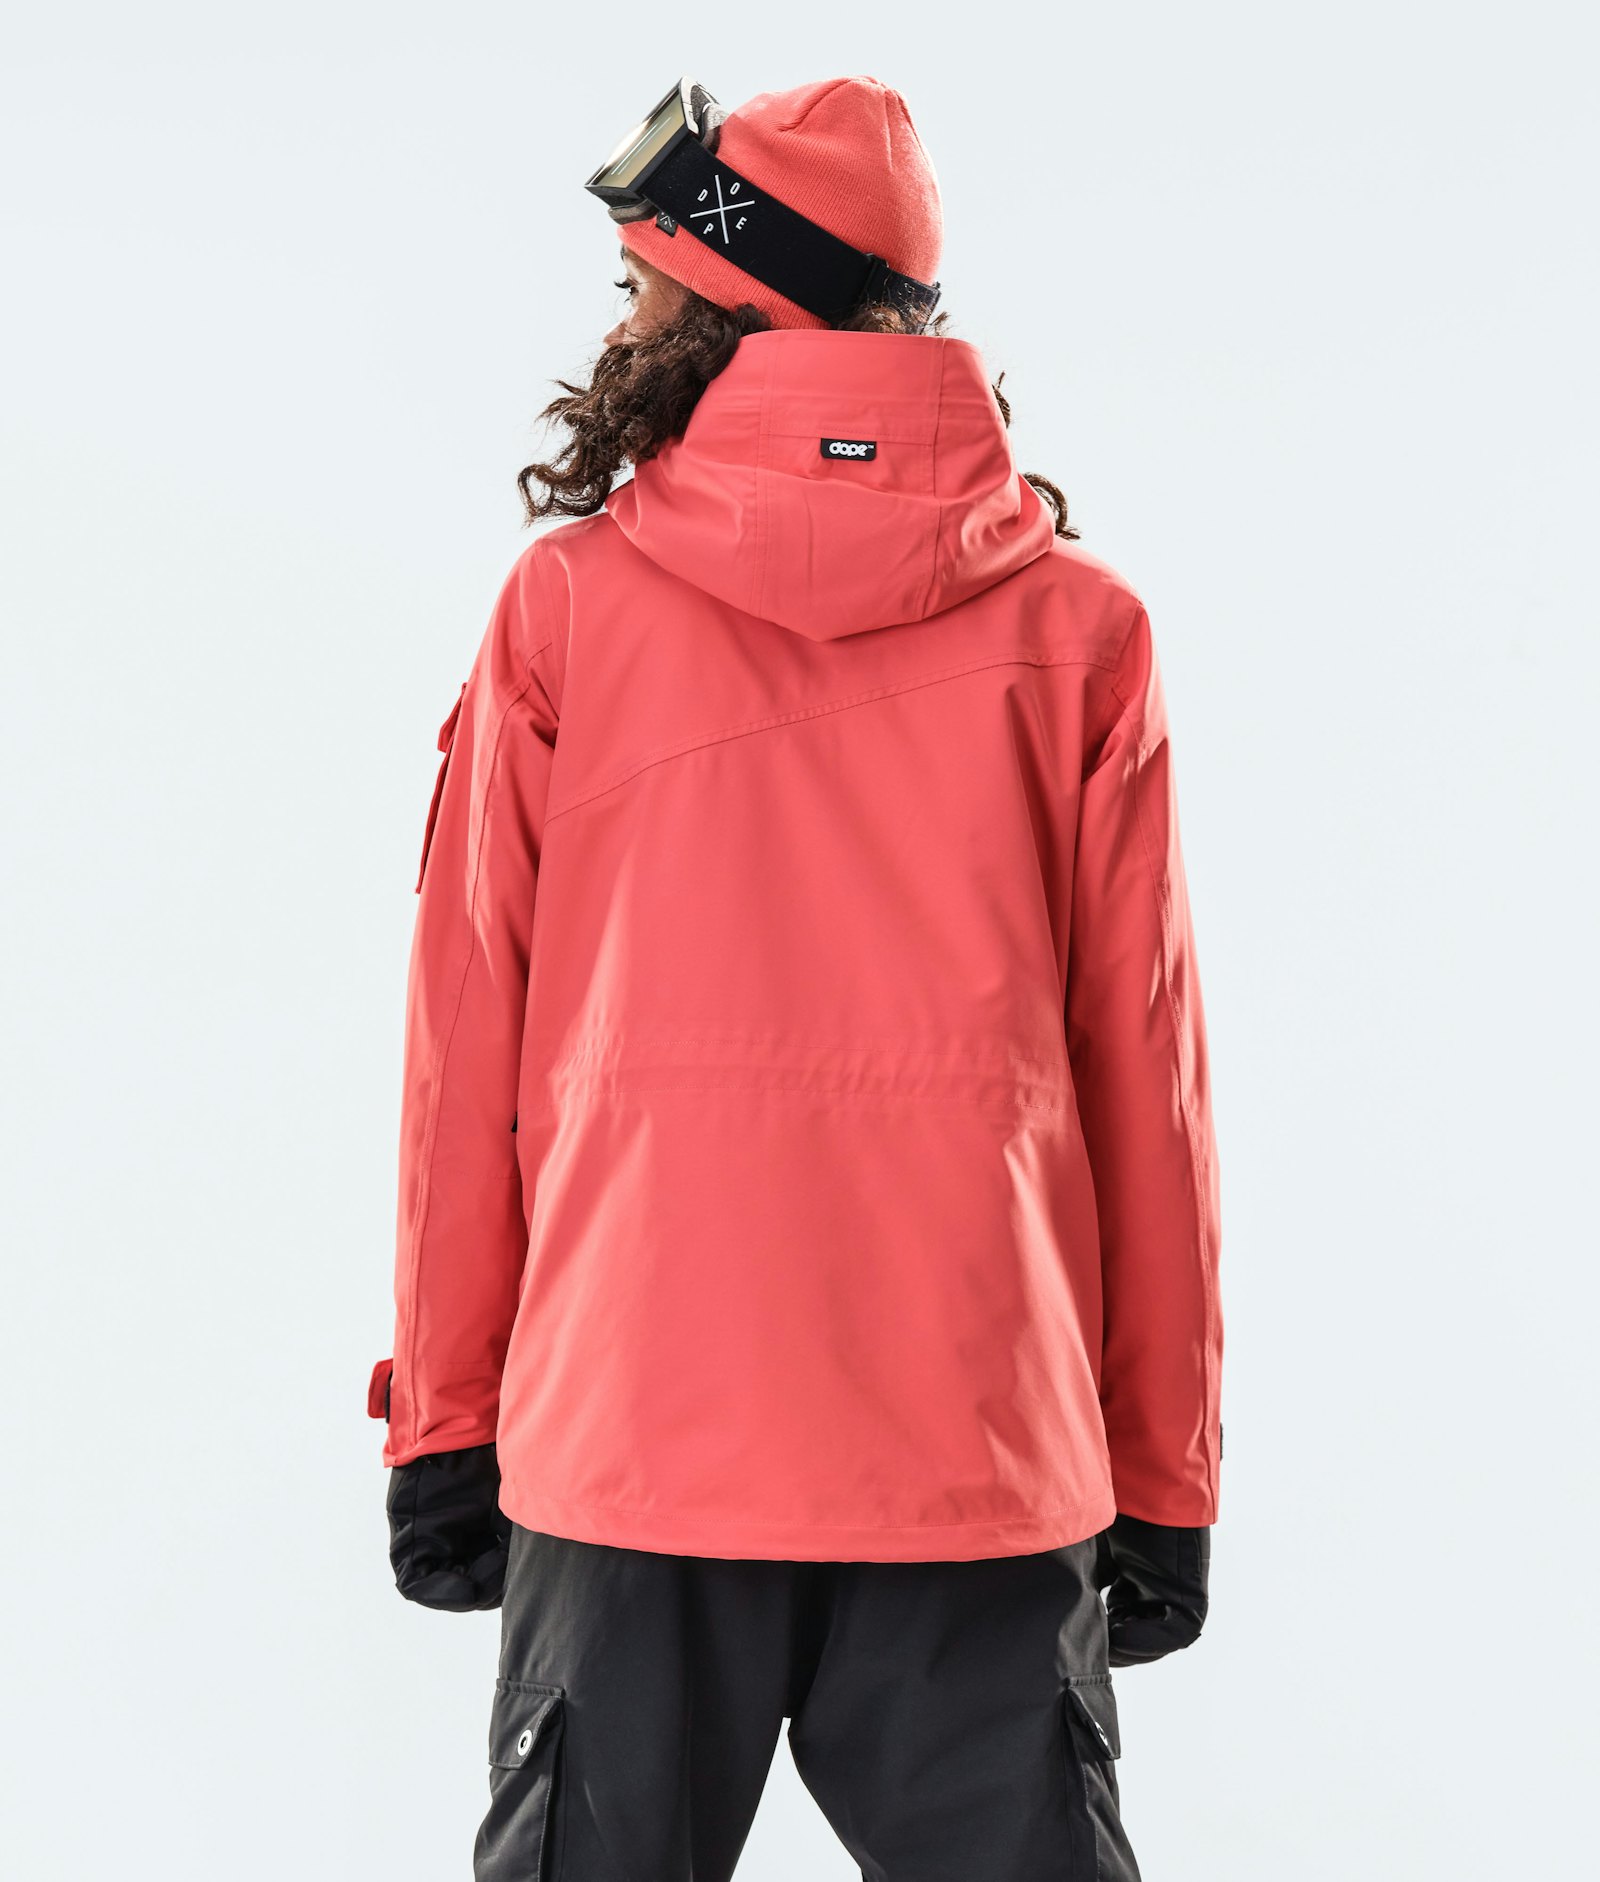 Dope Adept W 2020 Chaqueta Snowboard Mujer Coral